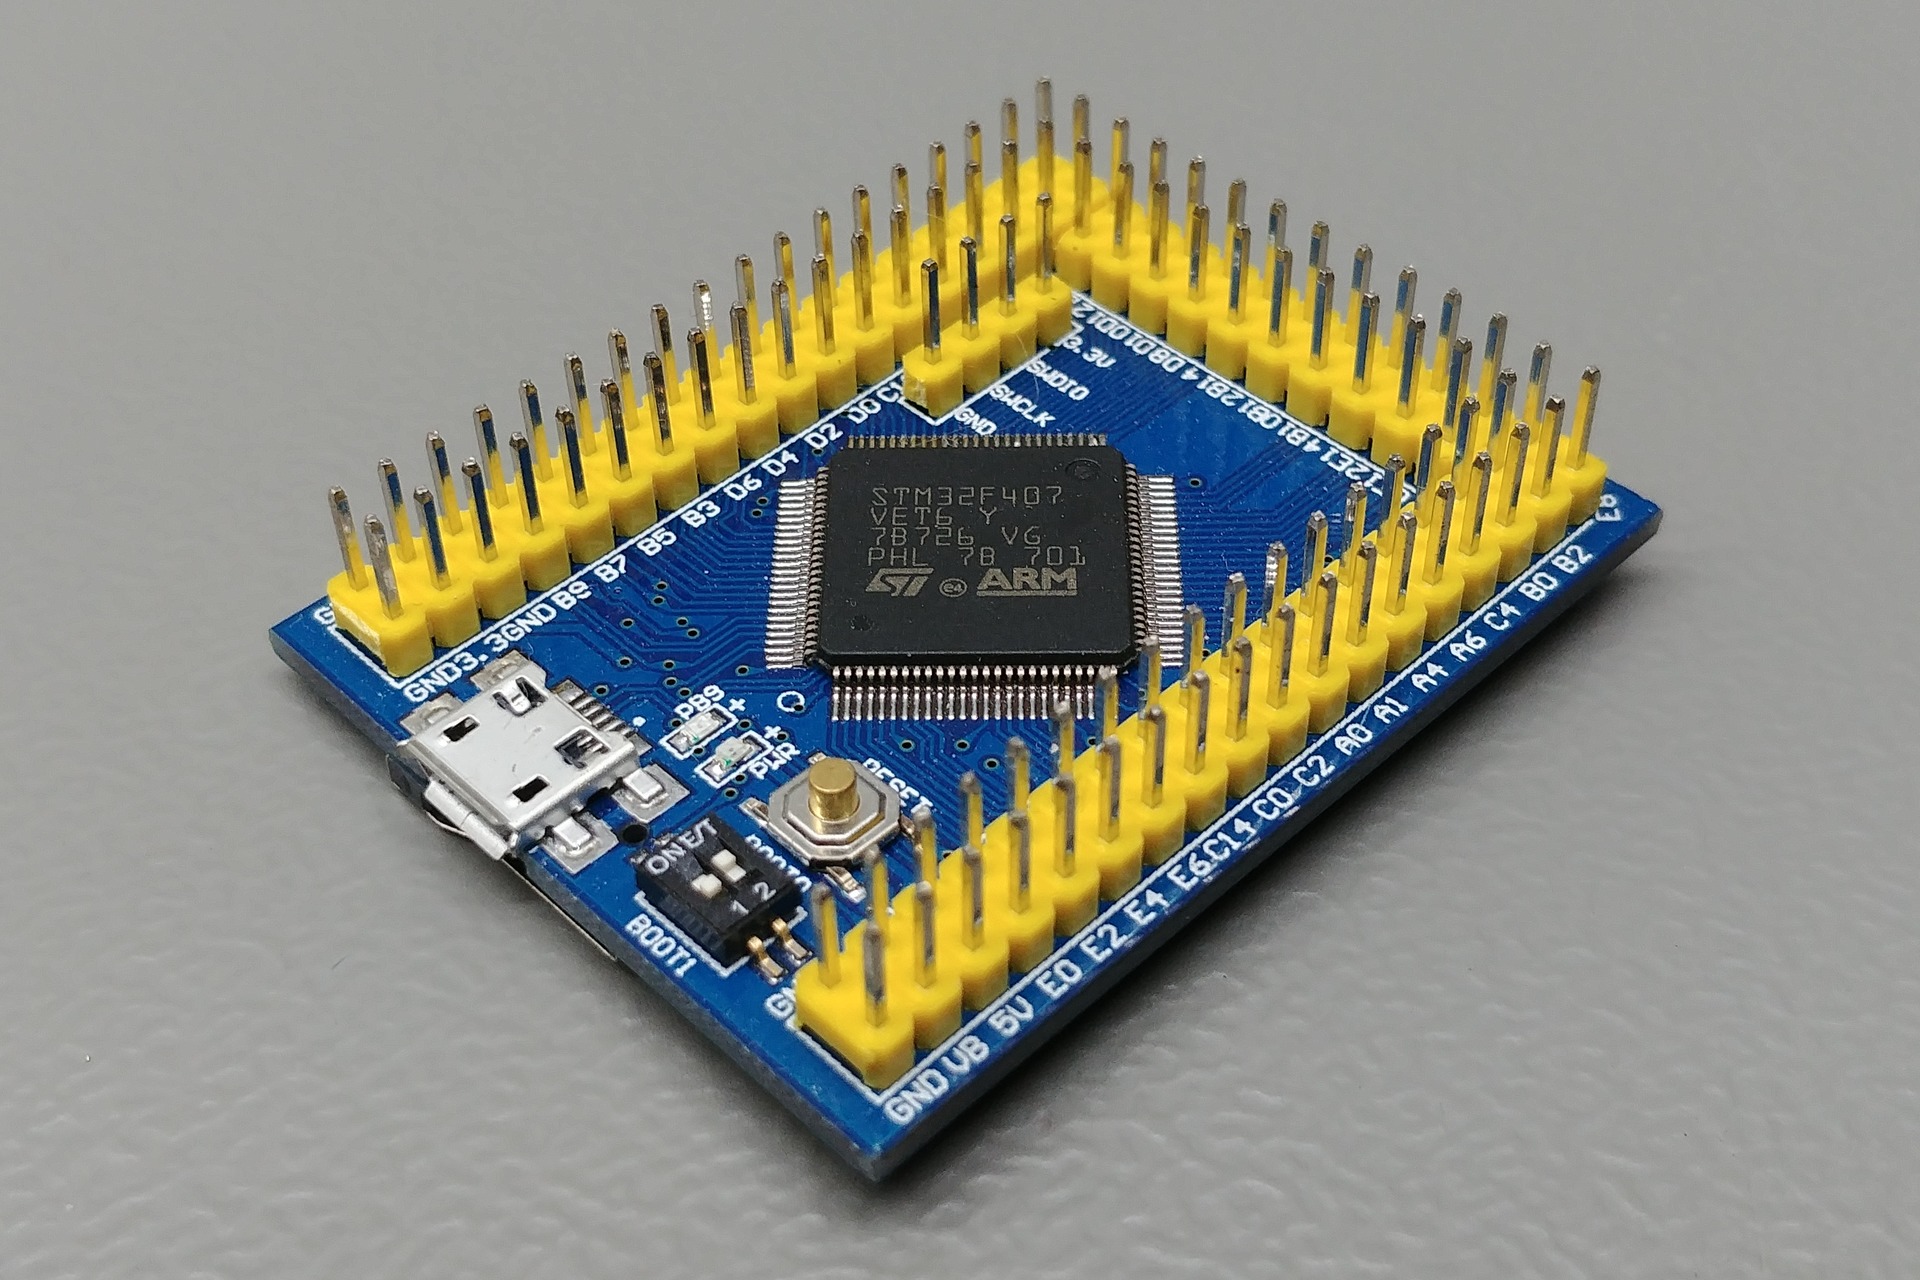 Picture of the vcc-gnd.com STM32F407VET6 mini